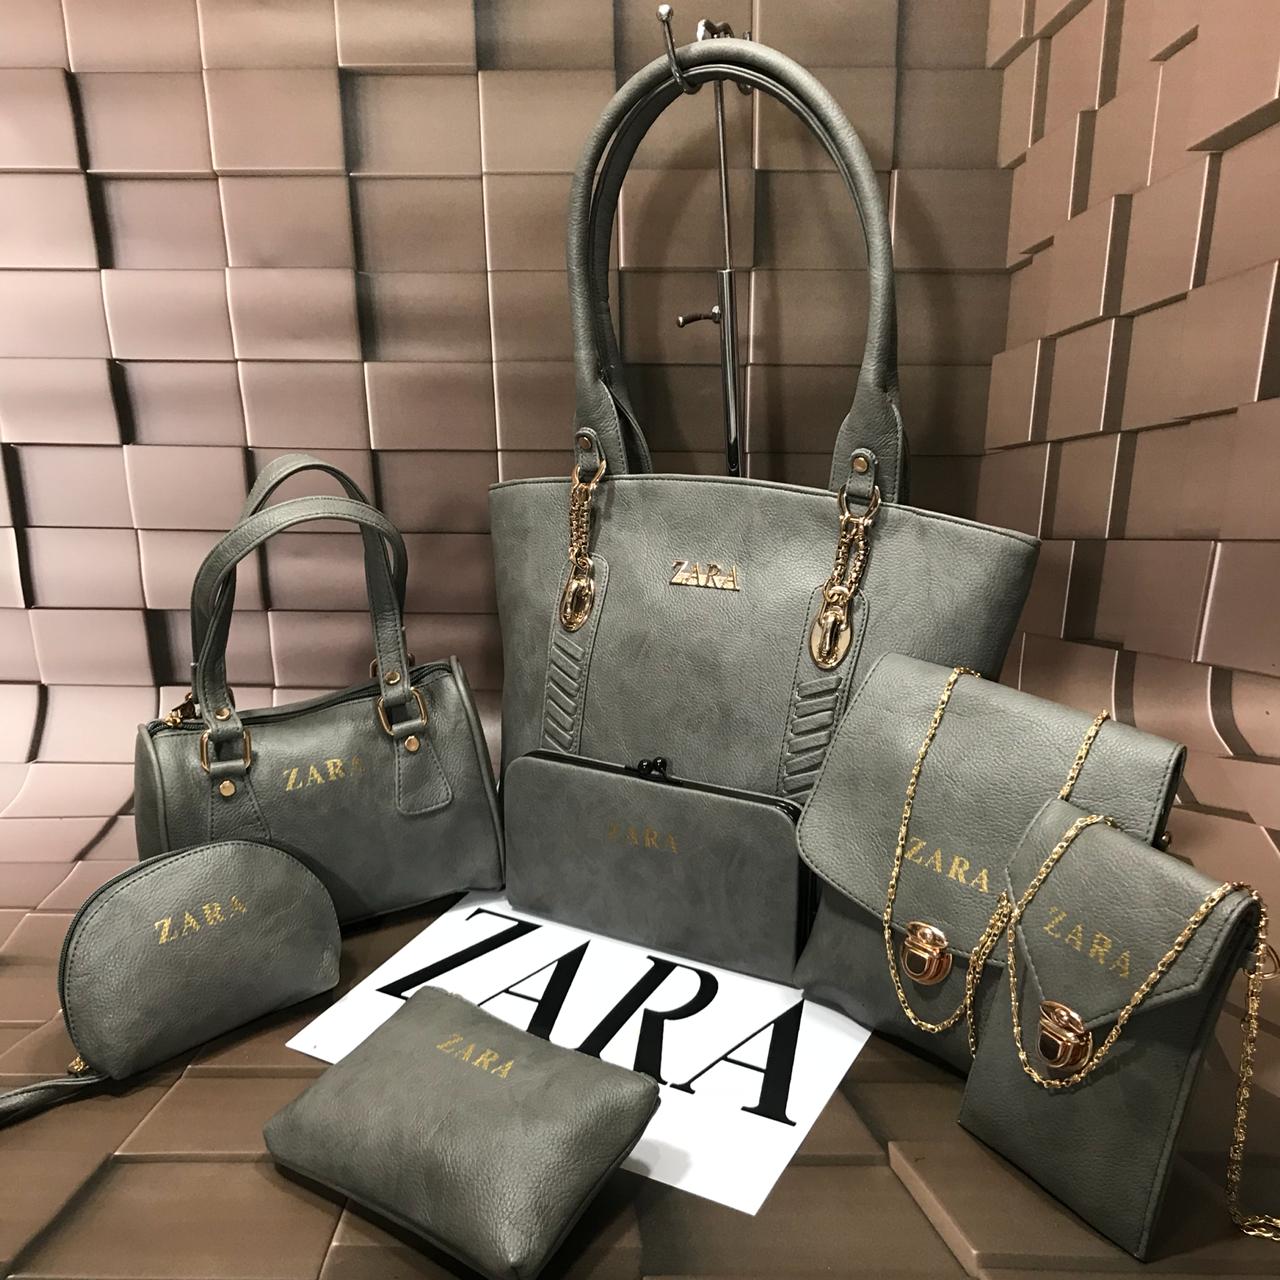 zara bags combo with price